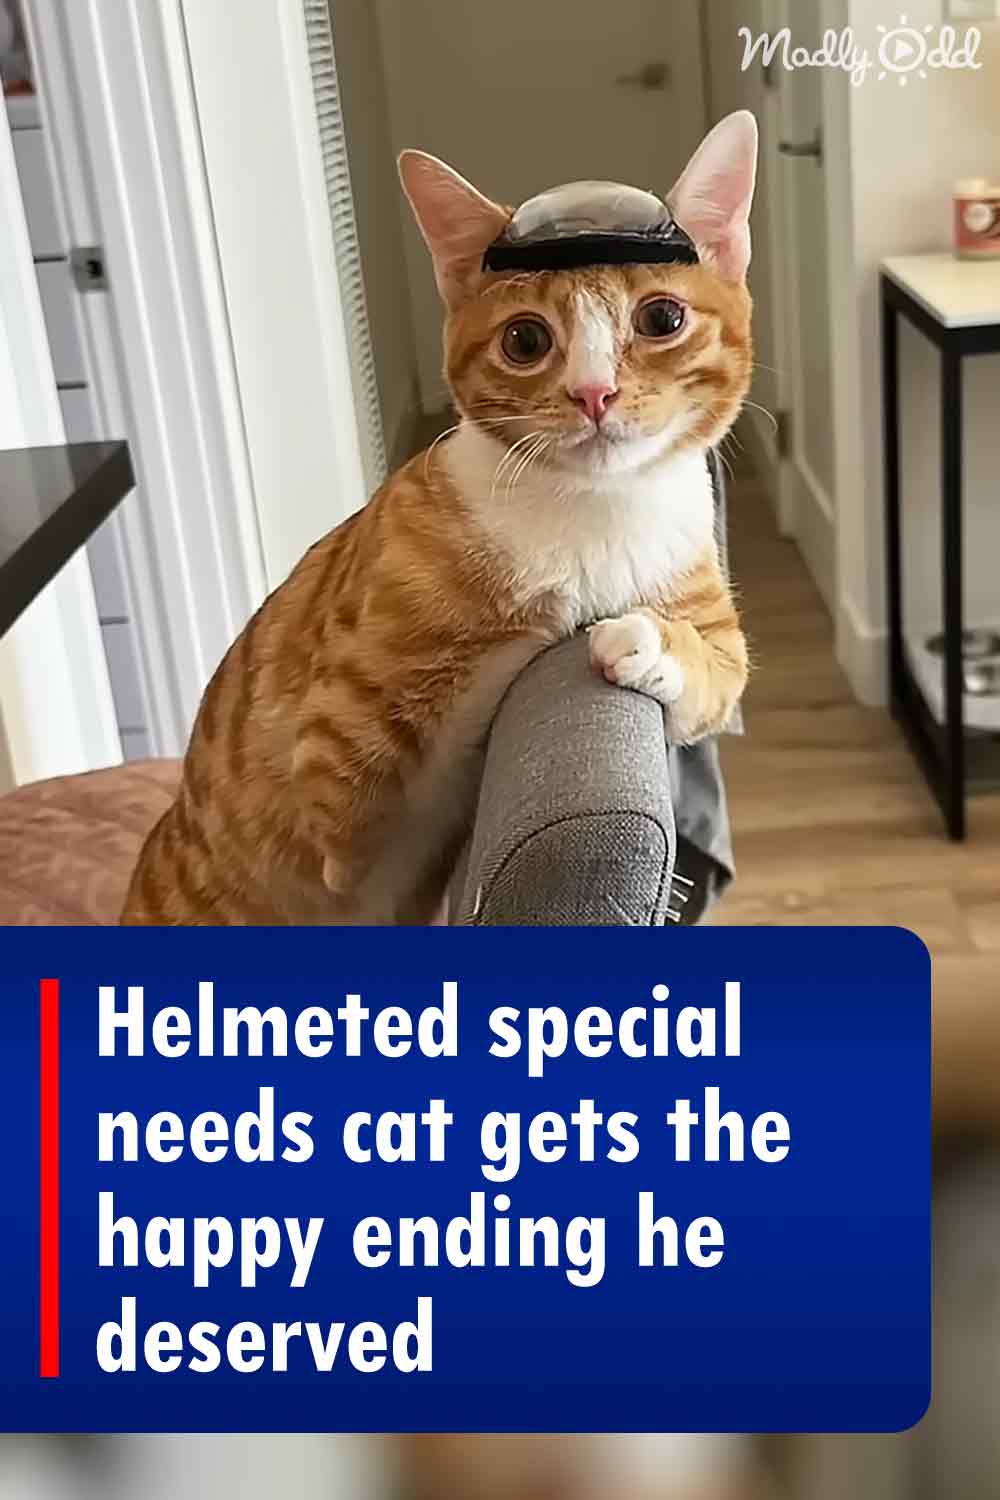 Helmeted special needs cat gets the happy ending he deserved